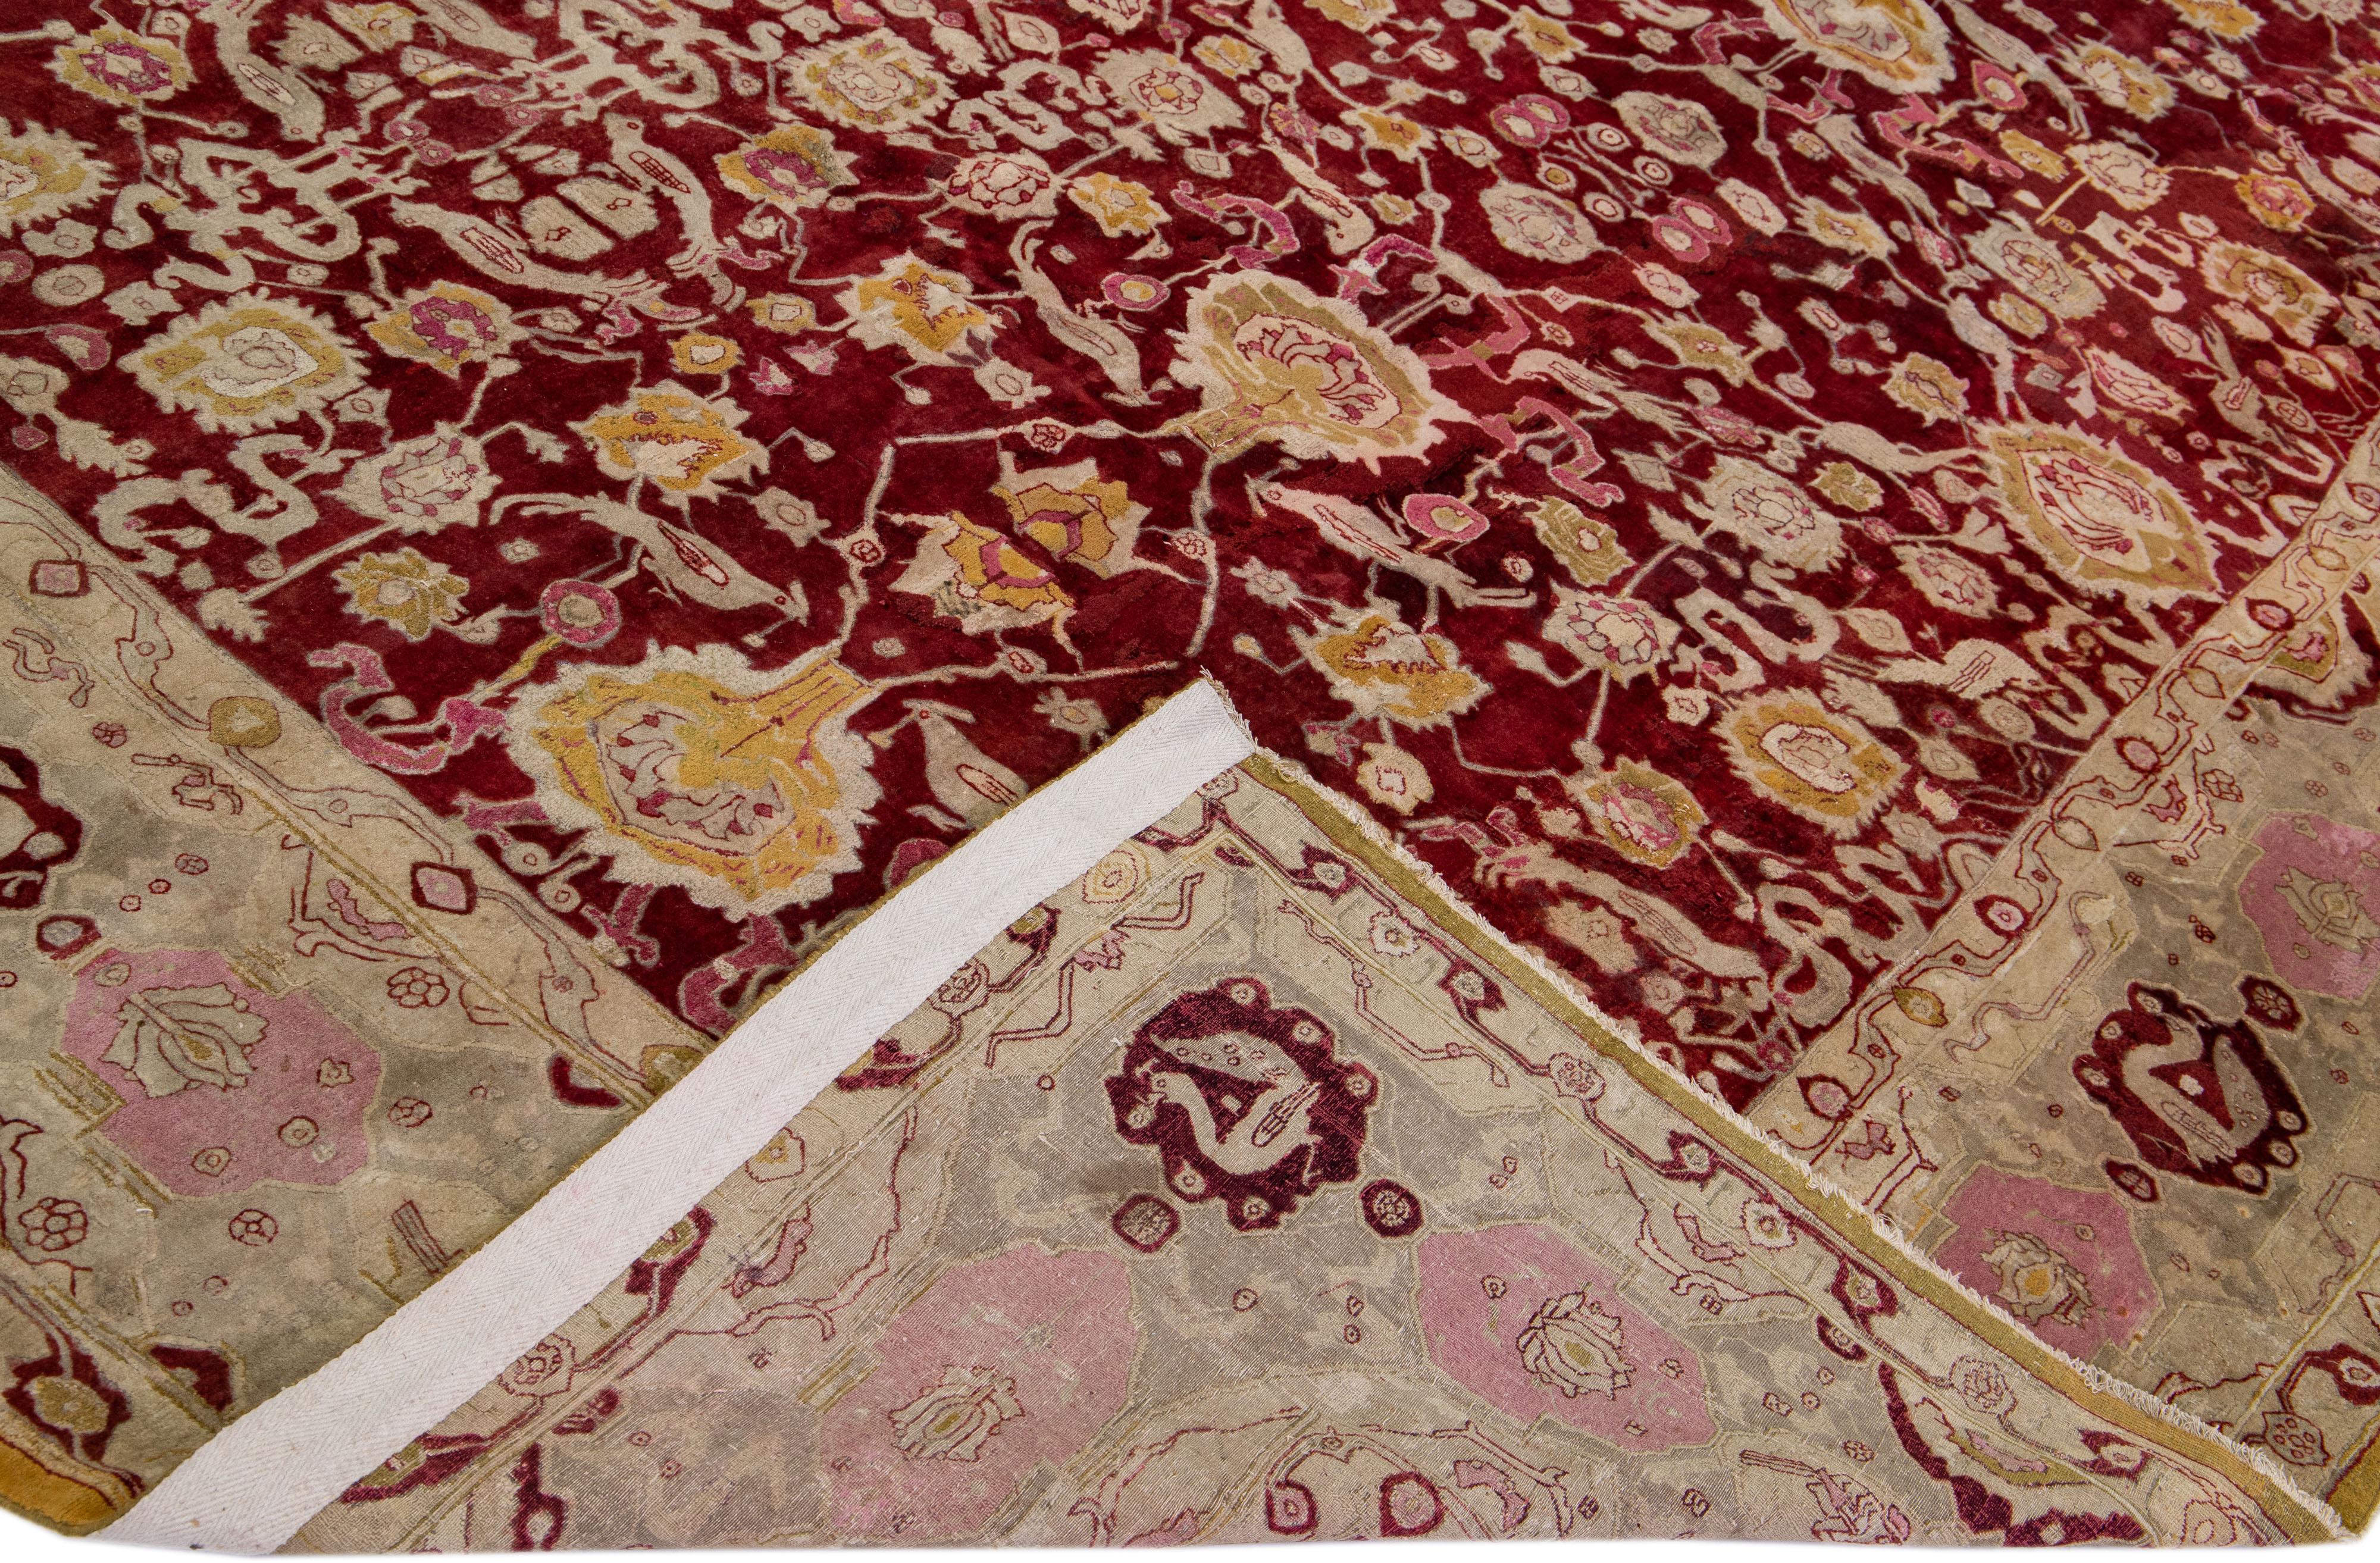 Beautiful antique Agra hand-knotted wool rug with a red field. This Indian rug has beige, pink, and goldenrod accents in a gorgeous all-over floral pattern design.

This rug measures: 11'10